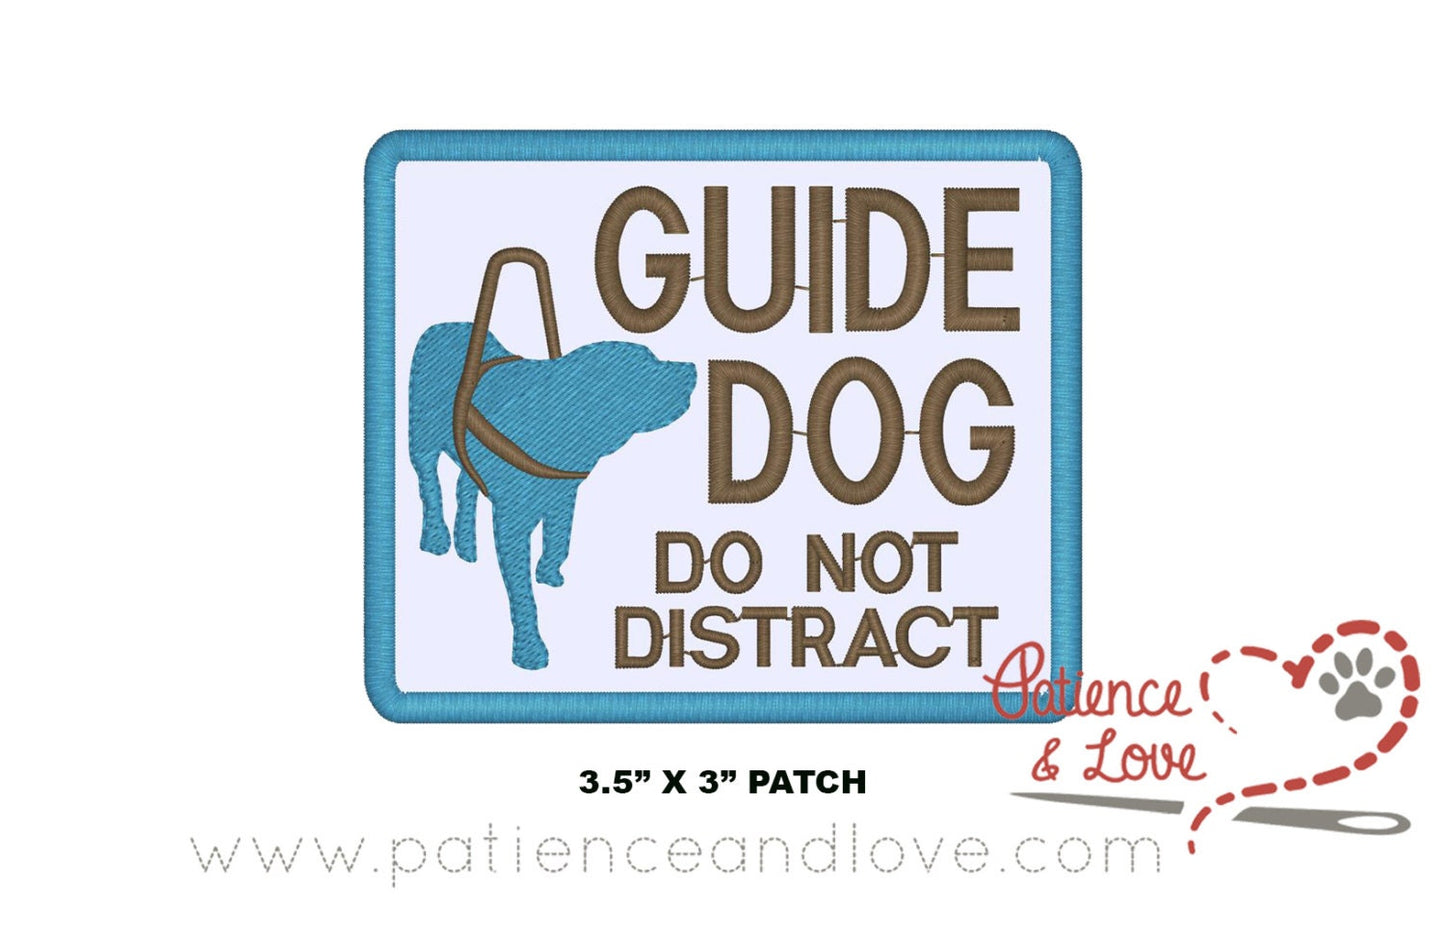 Guide Dog Do not distract, 3.5 x 3 inch rectangular patch